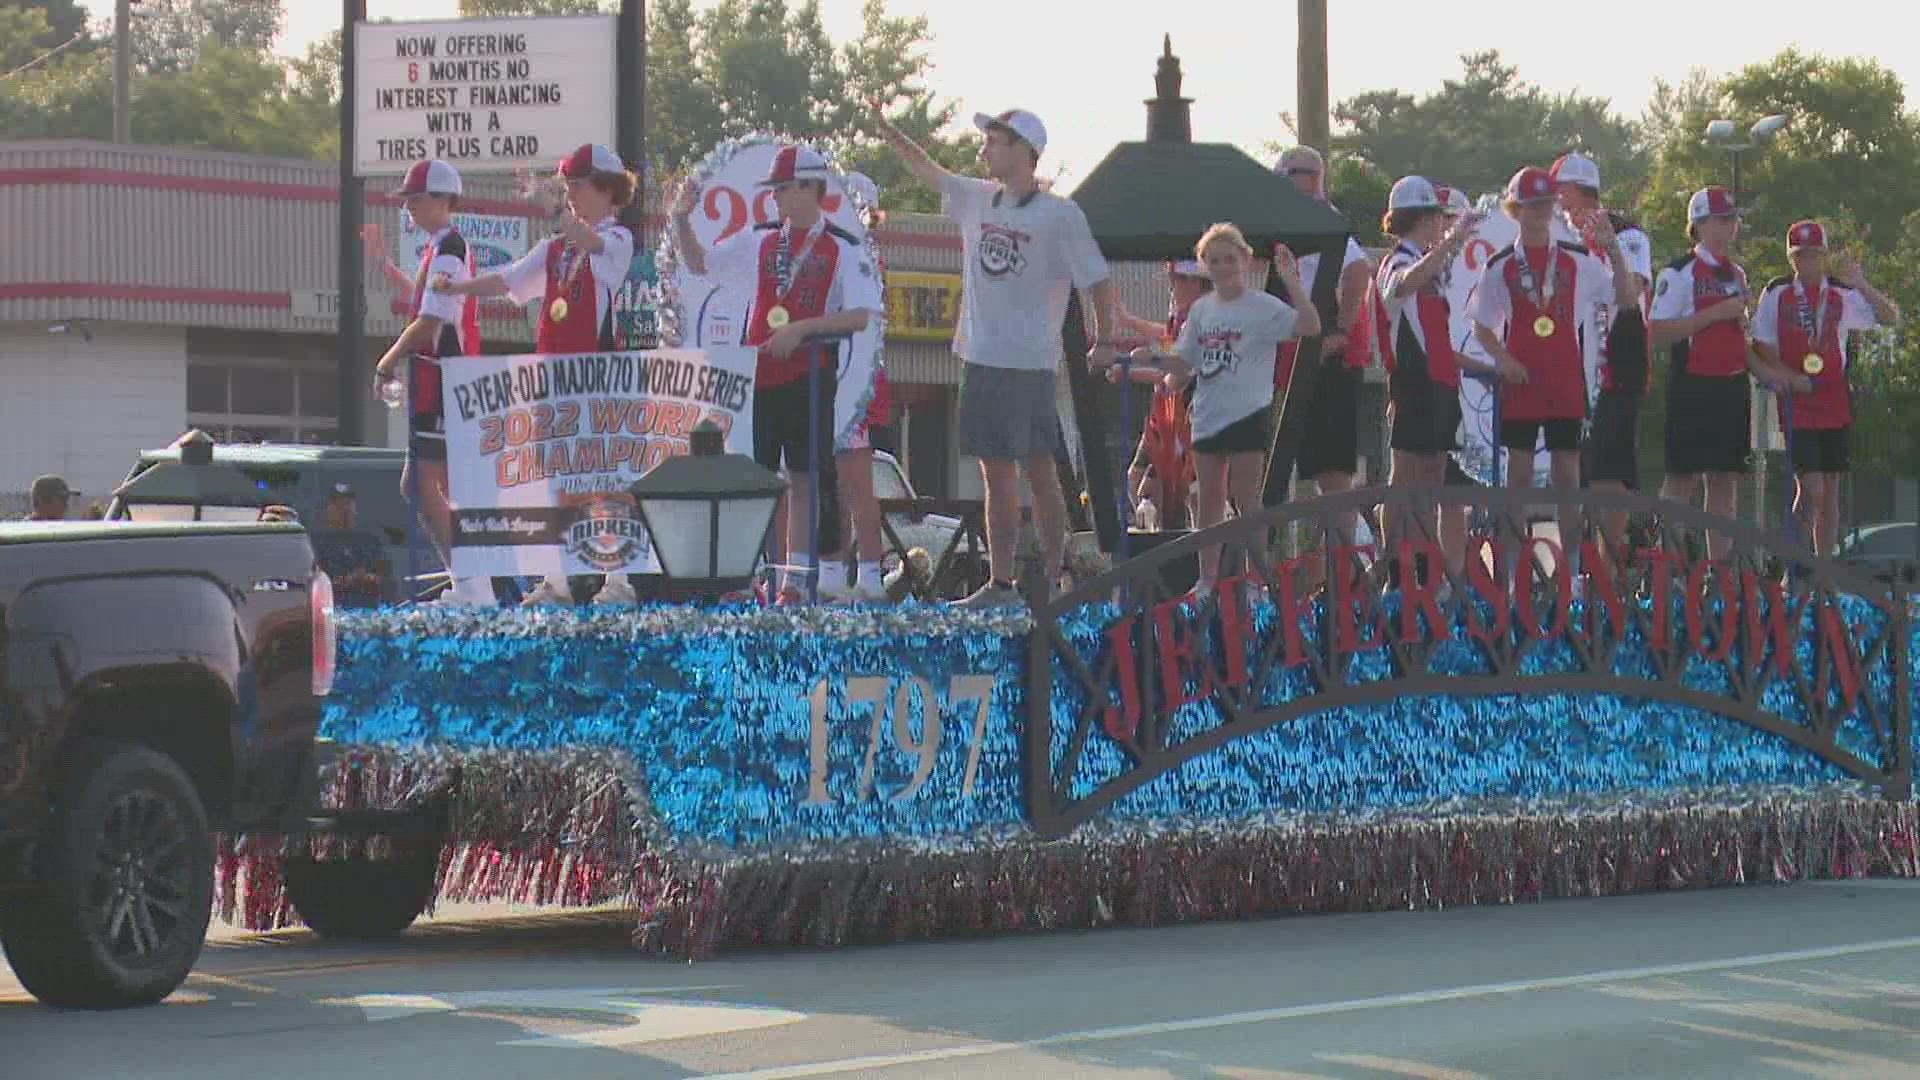 Friends and family enjoyed the floats and and marching band as the parade made it's way through Jeffersontown.